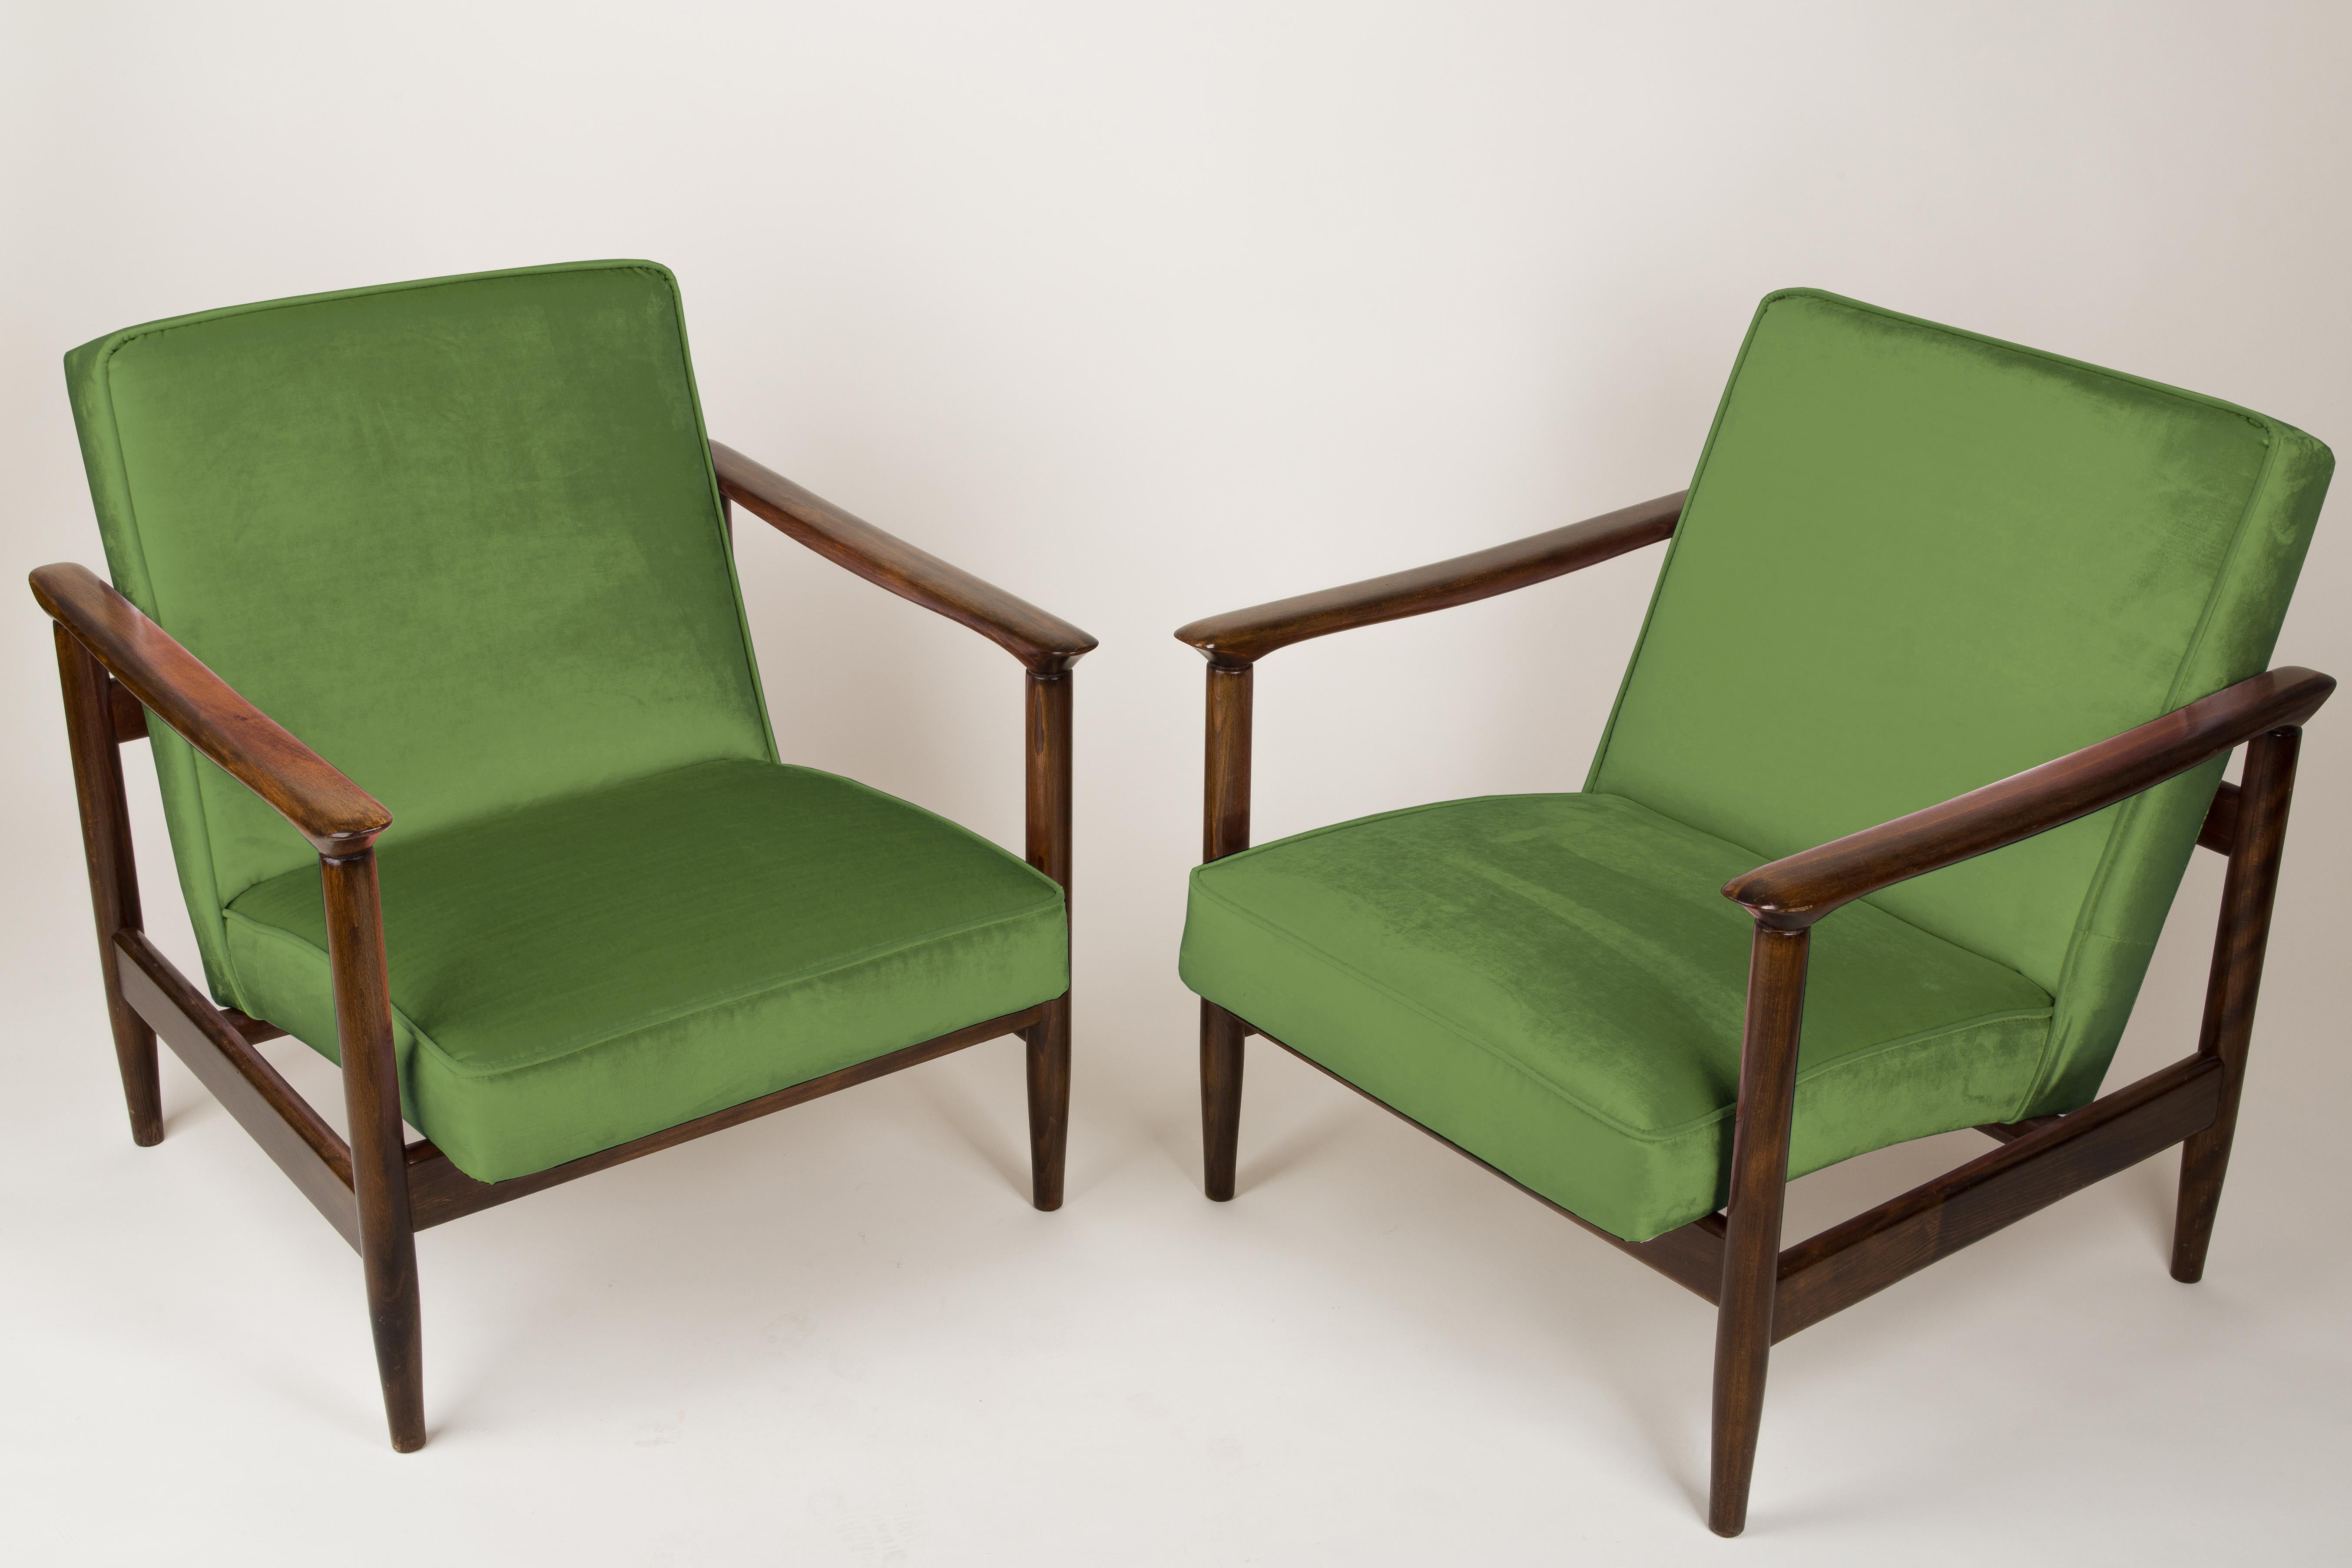 A pair of armchairs GFM-142, designed by Edmund Homa. The armchairs were made in the 1960s in the Gosciecinska Furniture factory. They are made from solid beechwood. The GFM-142 armchair is regarded one of the best polish armchair design from the